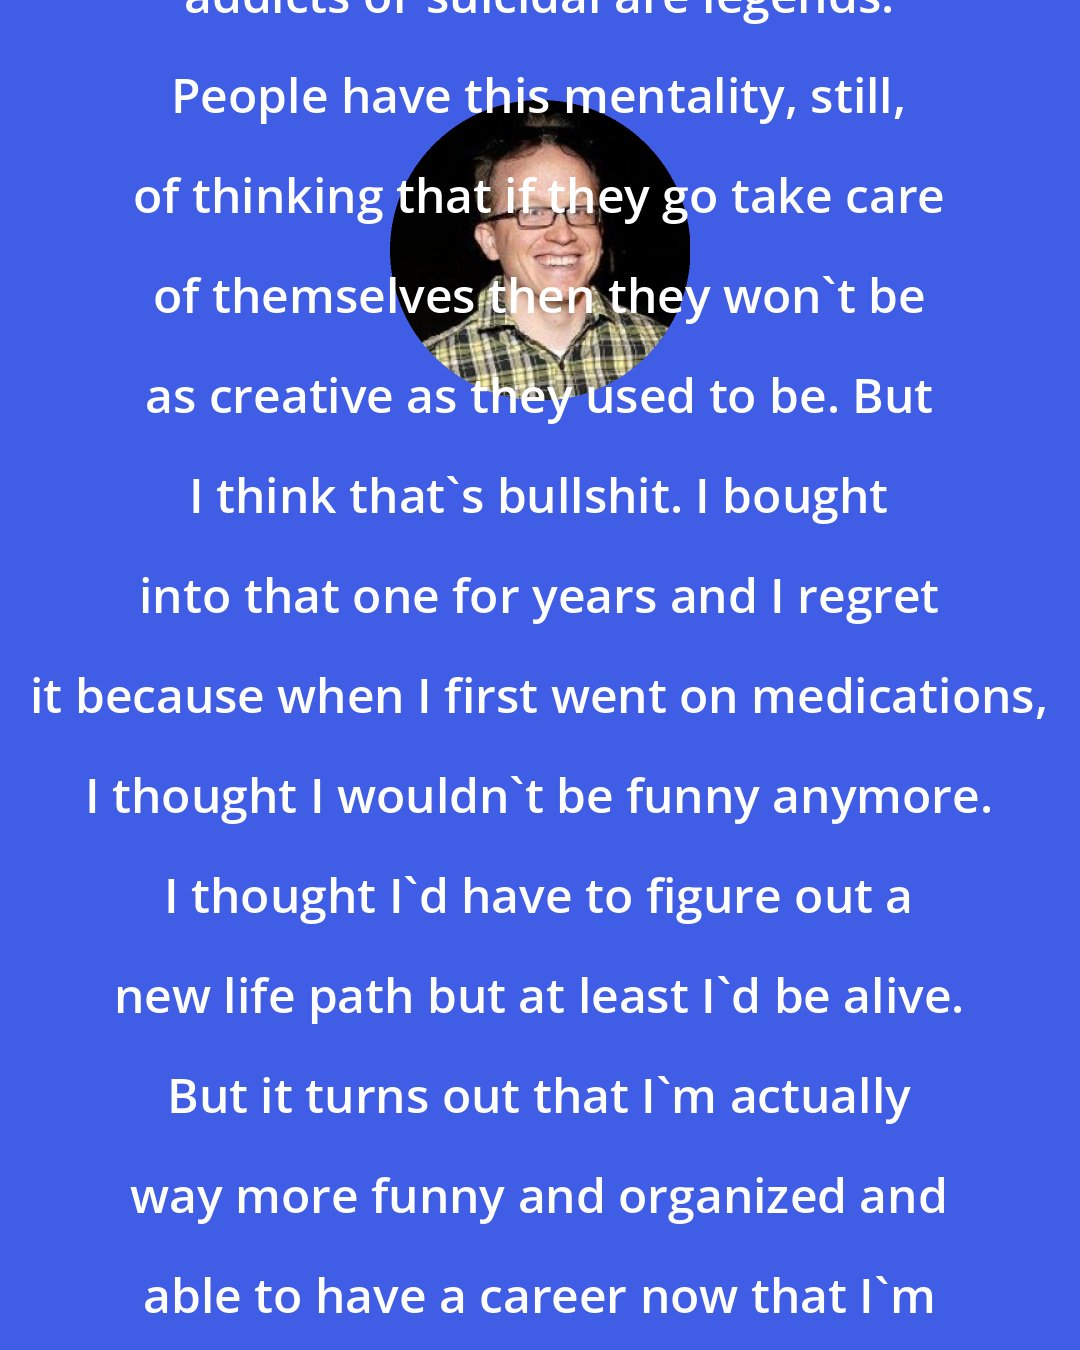 Chris Gethard: In music so many people who have been addicts or suicidal are legends. People have this mentality, still, of thinking that if they go take care of themselves then they won't be as creative as they used to be. But I think that's bullshit. I bought into that one for years and I regret it because when I first went on medications, I thought I wouldn't be funny anymore. I thought I'd have to figure out a new life path but at least I'd be alive. But it turns out that I'm actually way more funny and organized and able to have a career now that I'm able to have my head on straight.